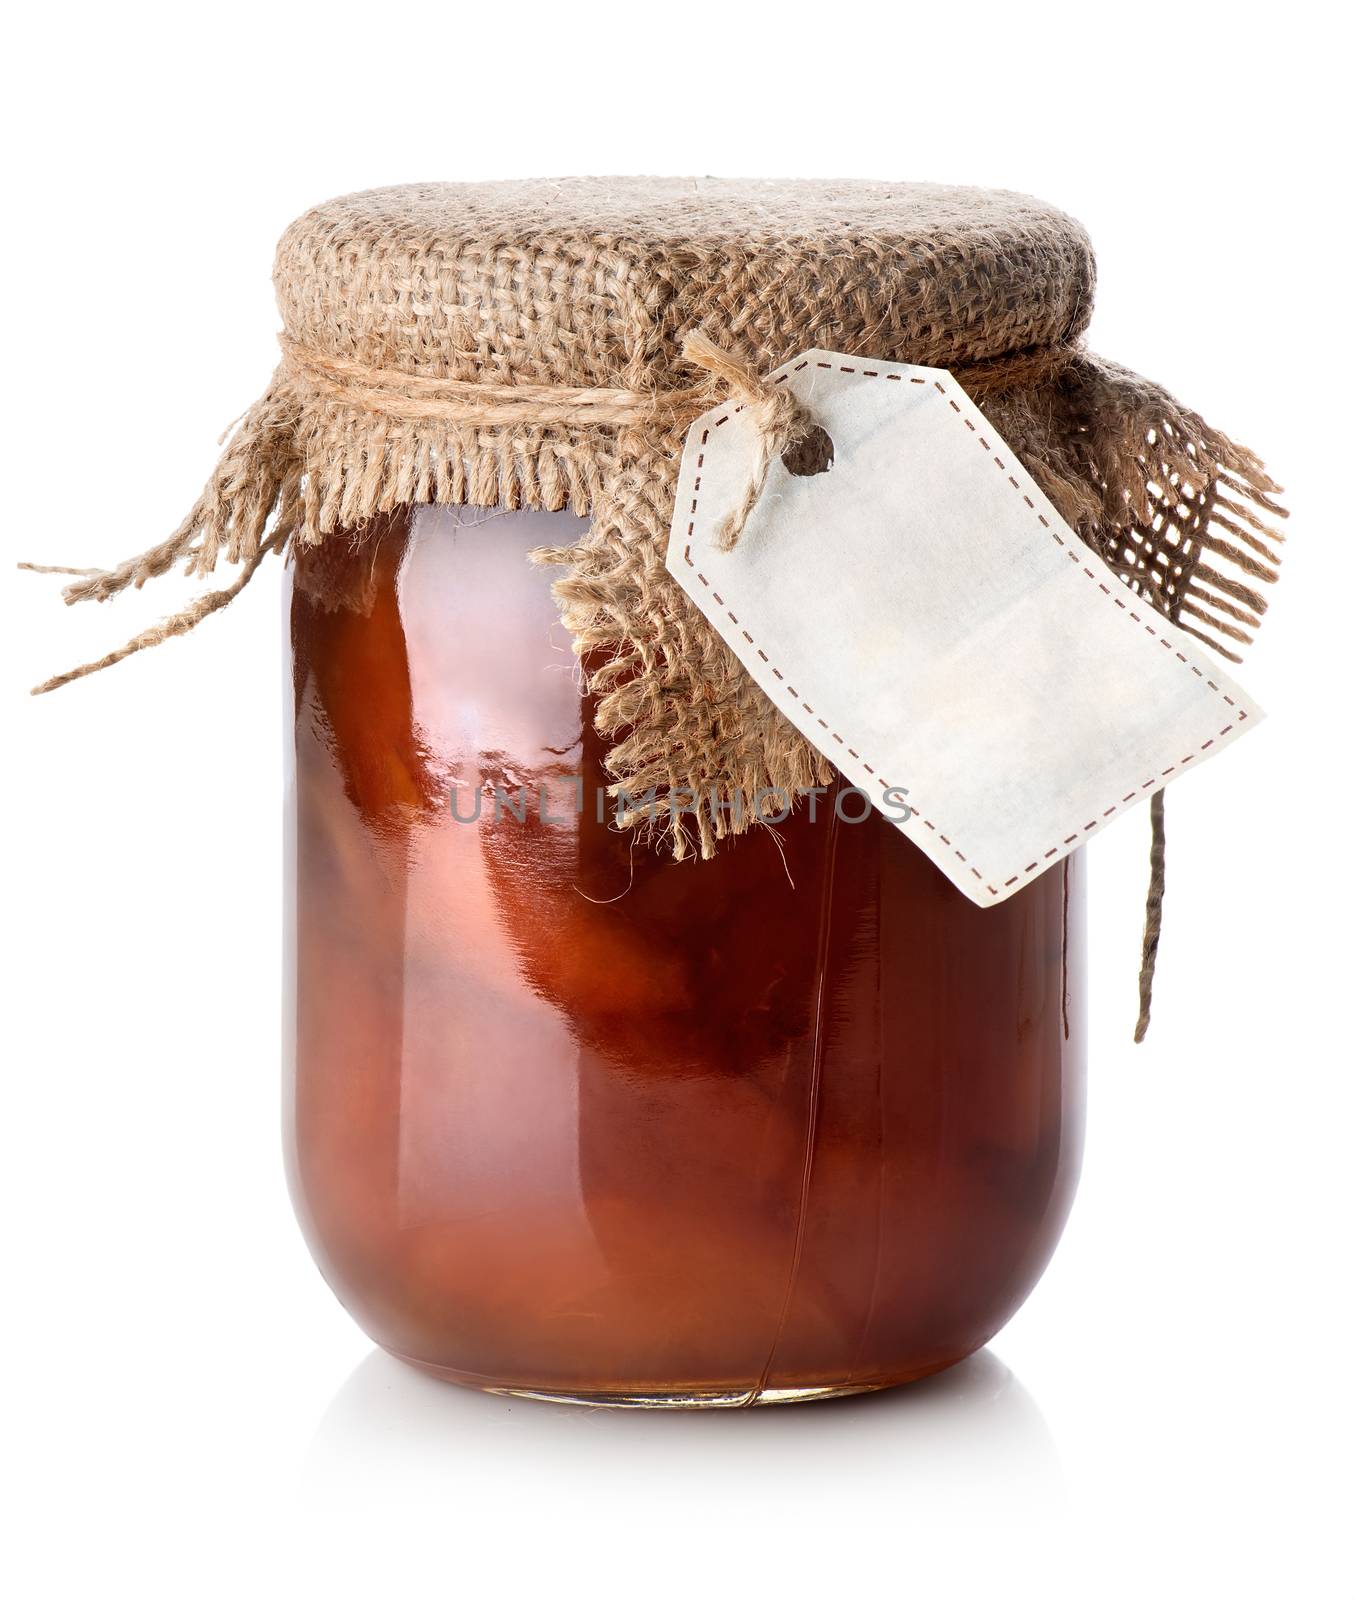 Jar of confiture by Givaga